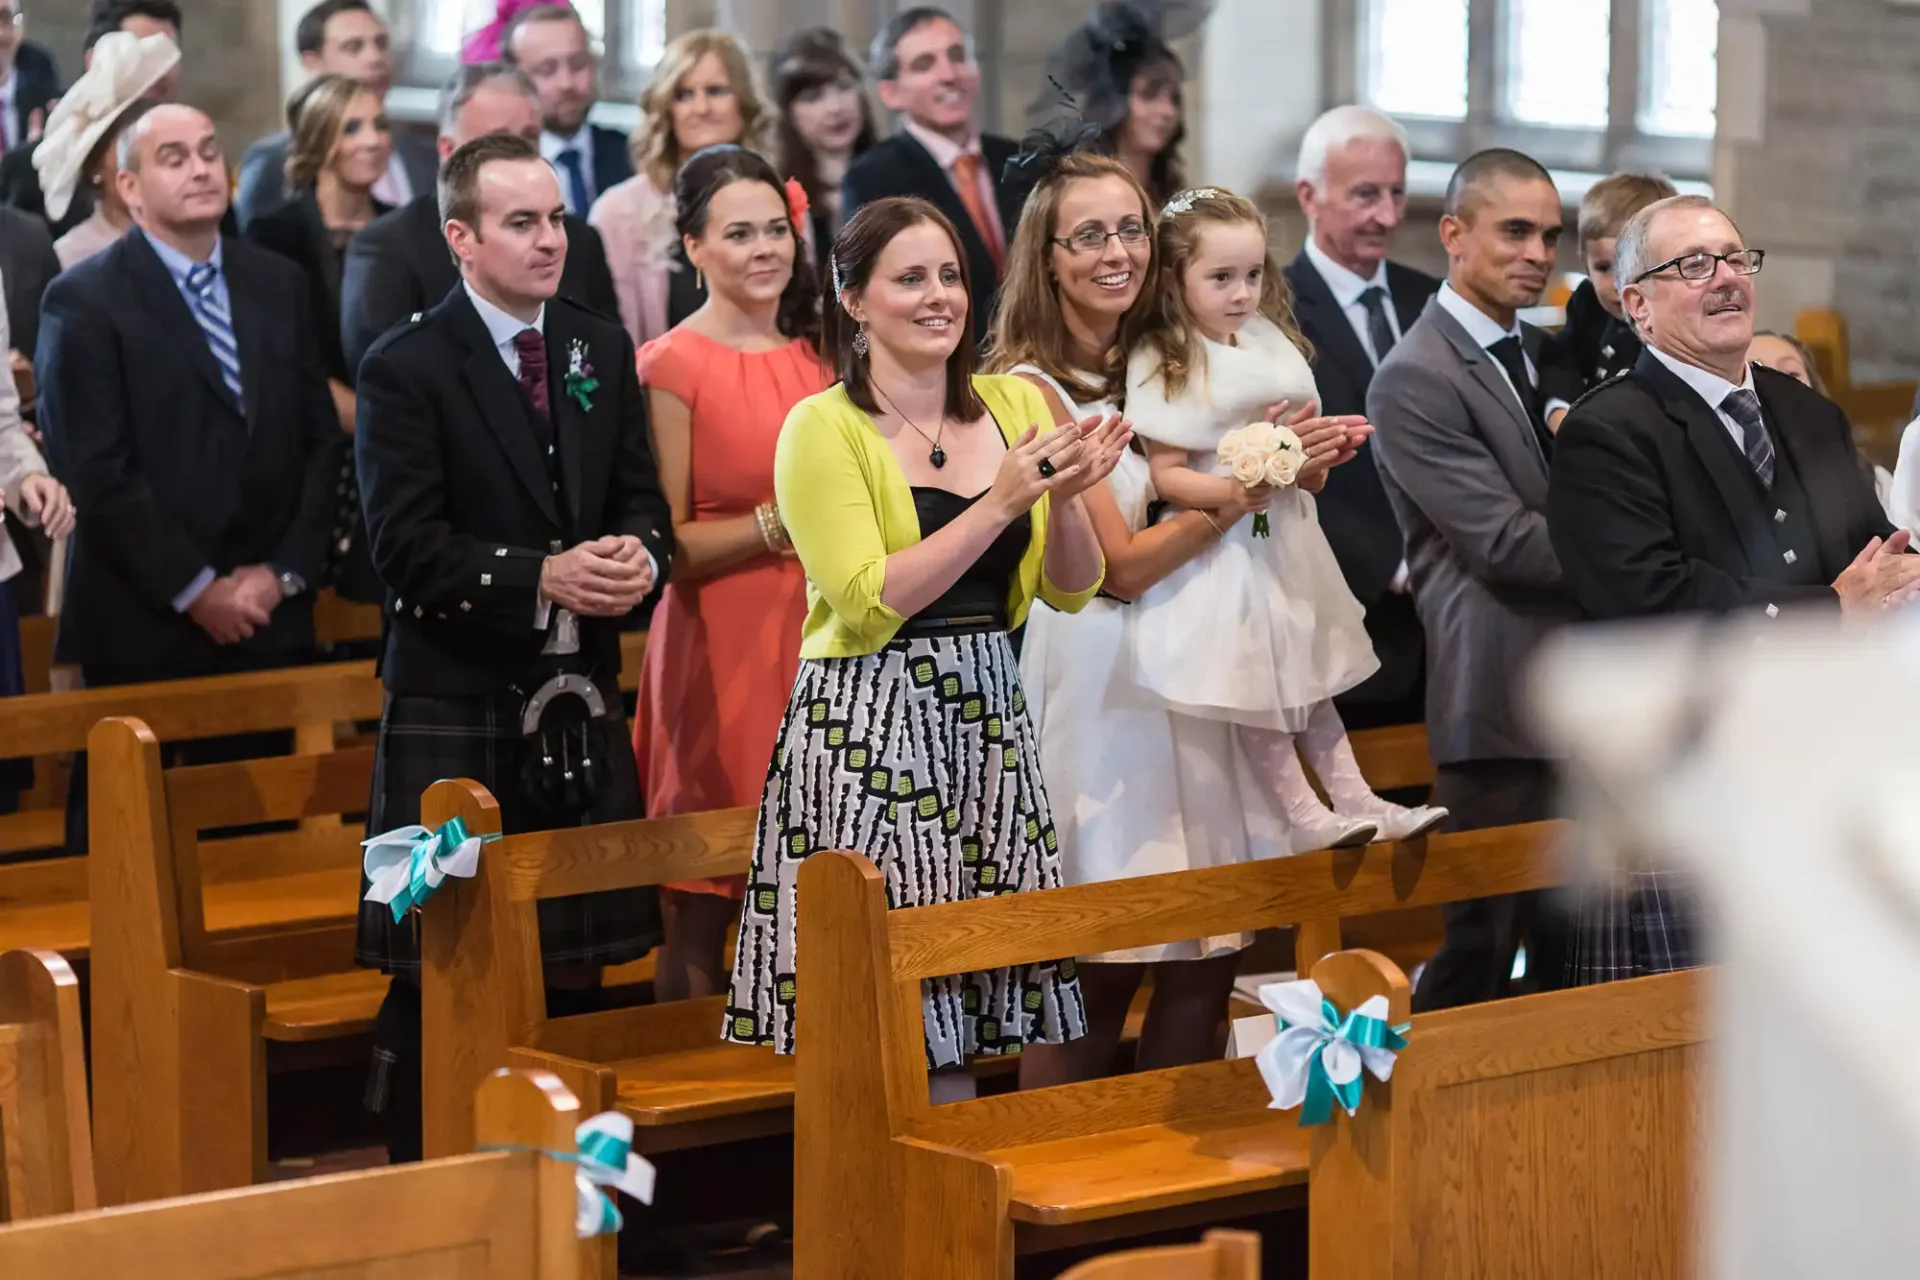 Guests smiling and clapping at a wedding ceremony inside a church with wooden pews decorated with bows.